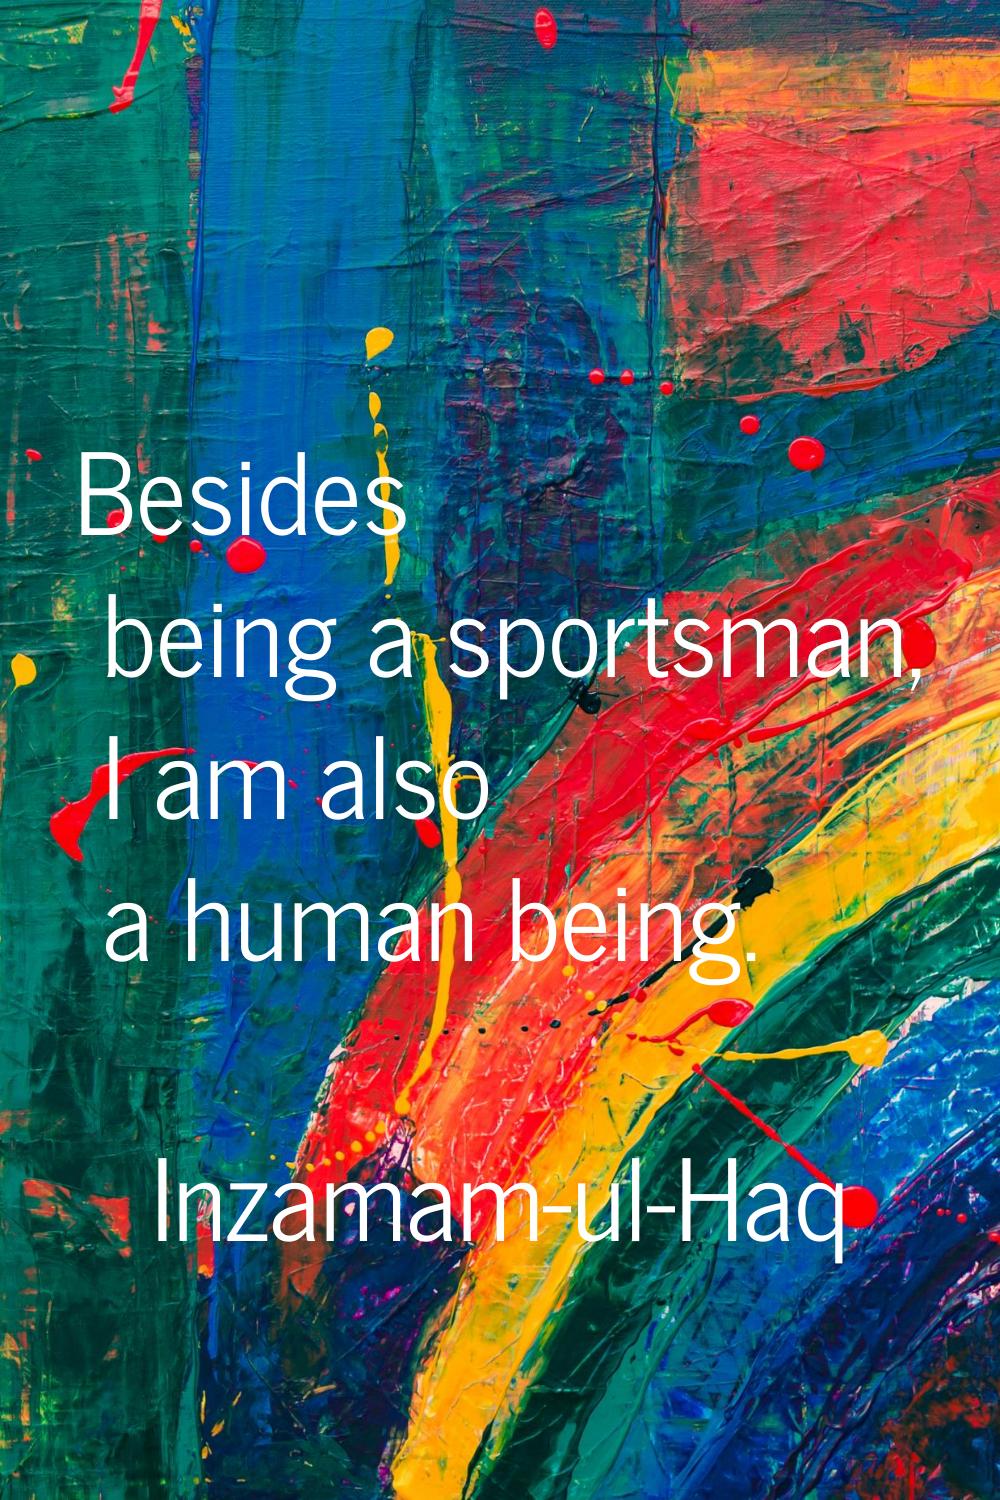 Besides being a sportsman, I am also a human being.